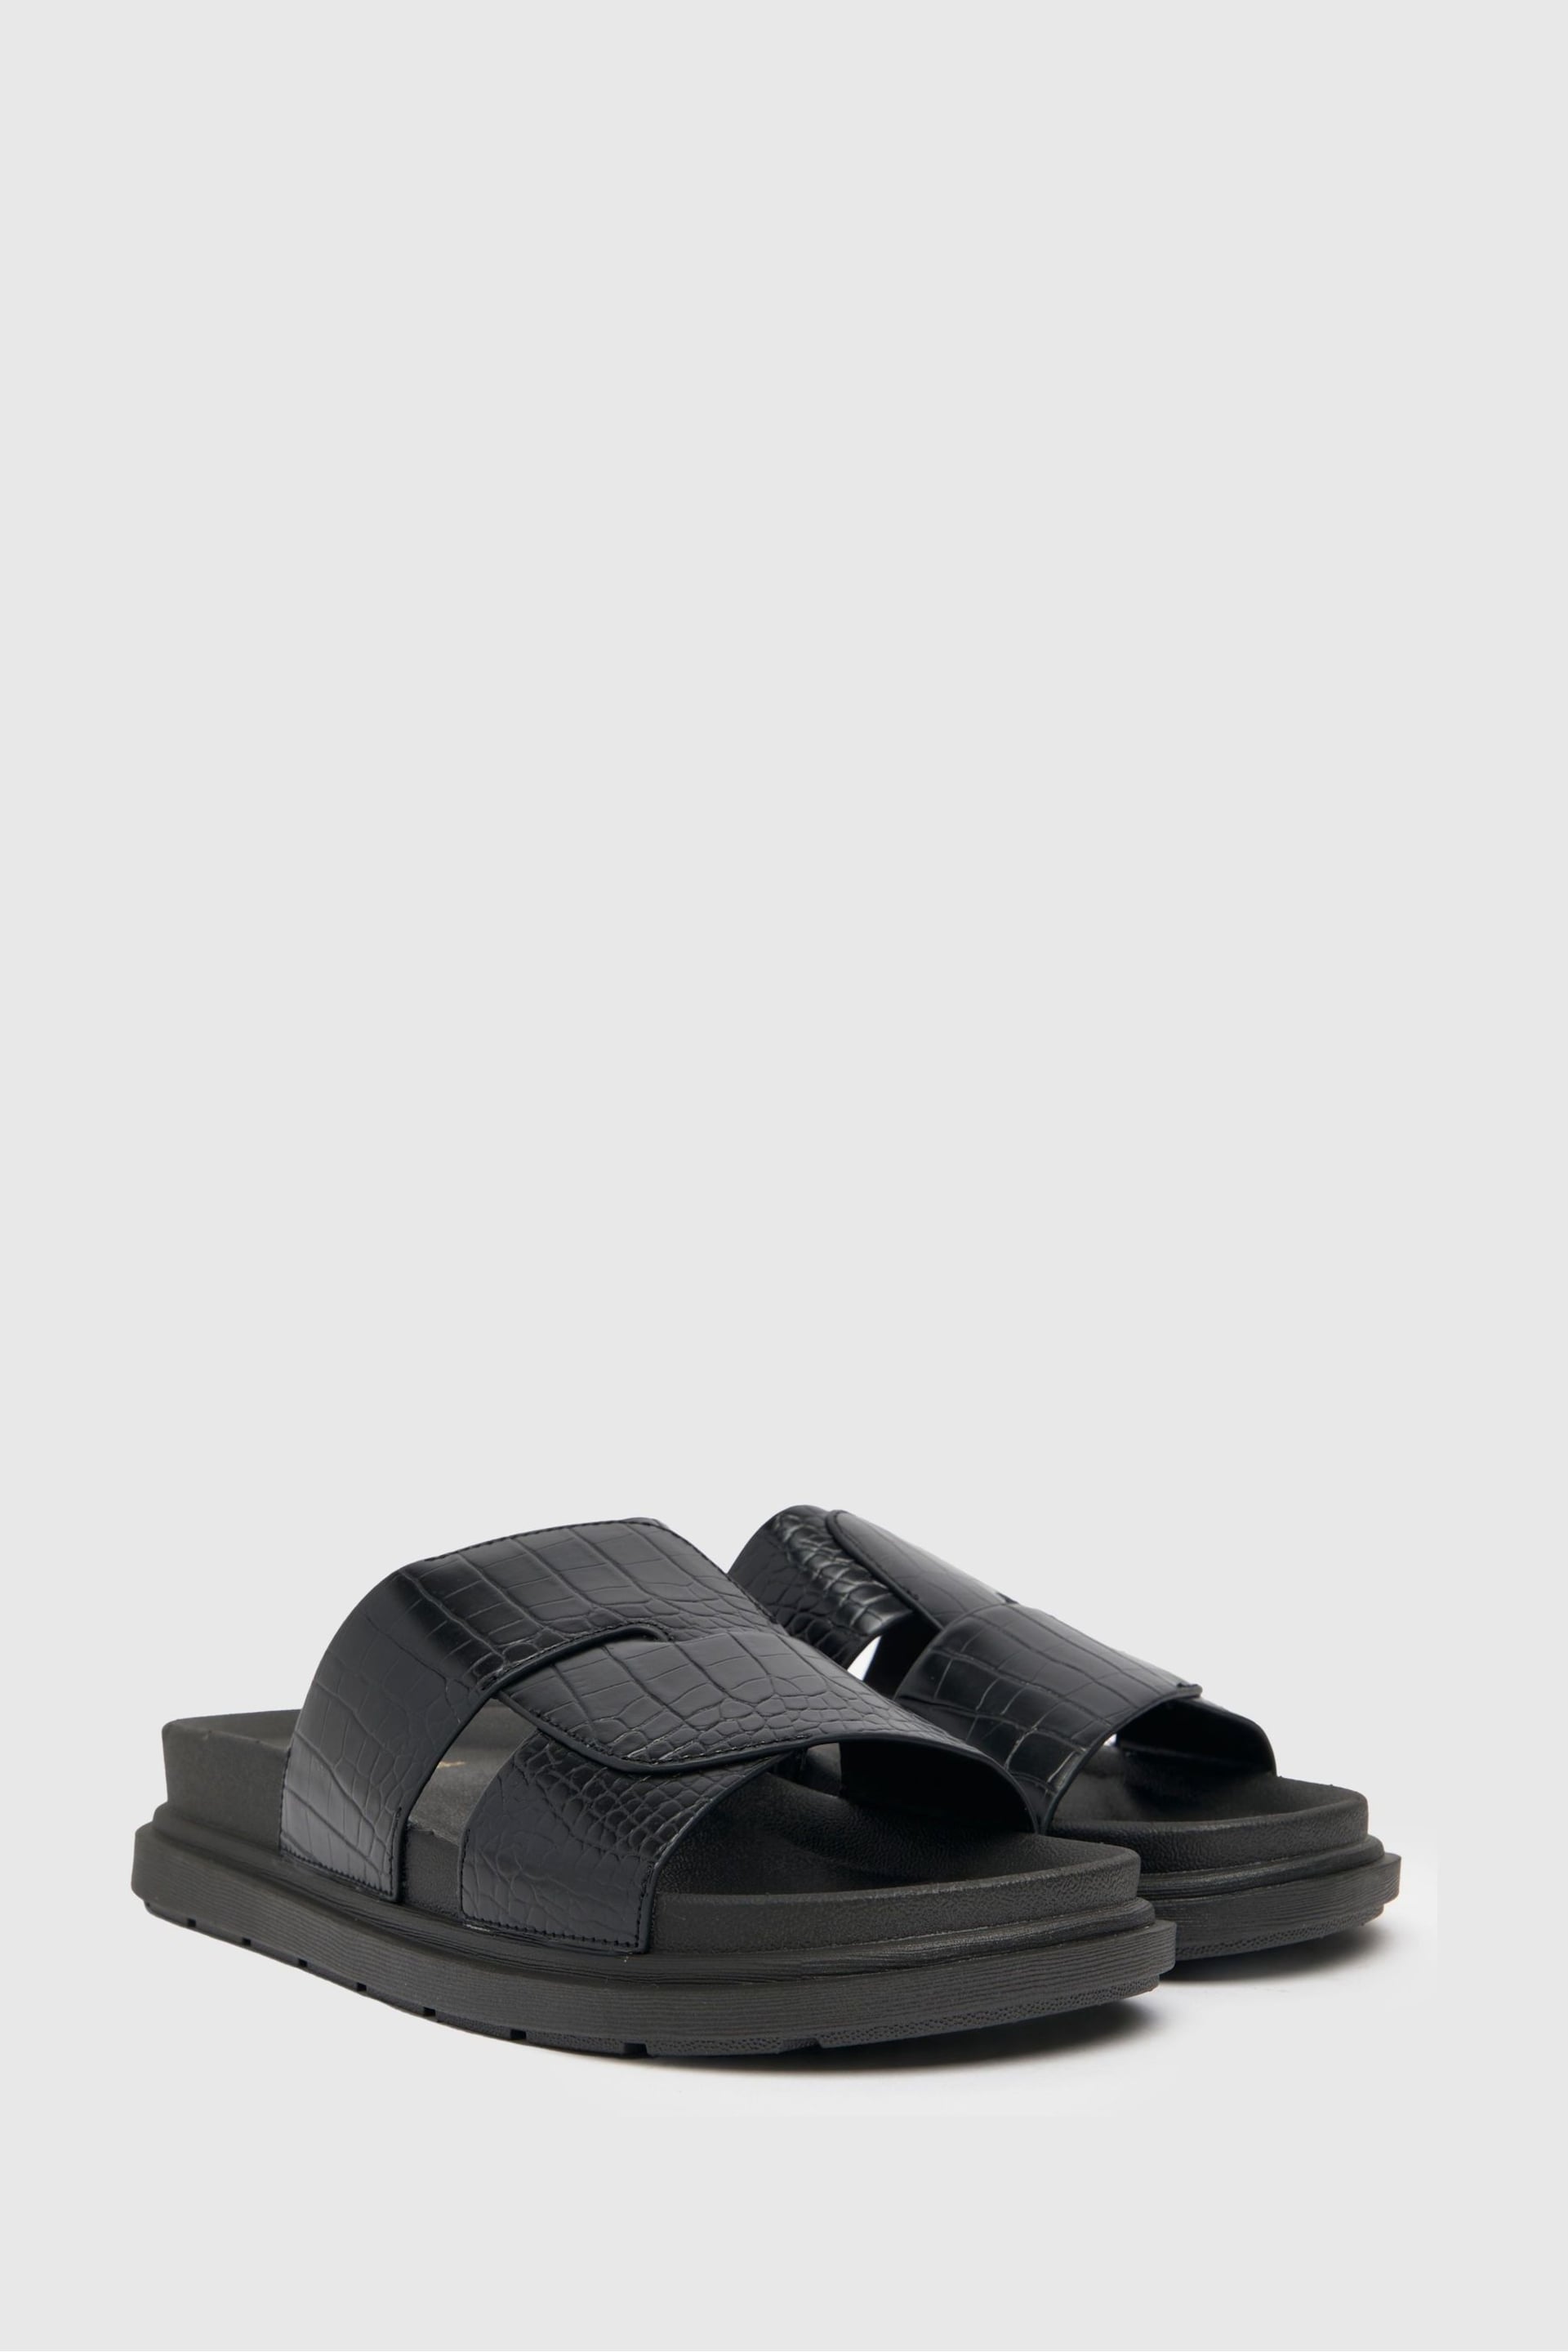 Schuh Tally Croc Cross Strap Footbed Sandals - Image 2 of 4